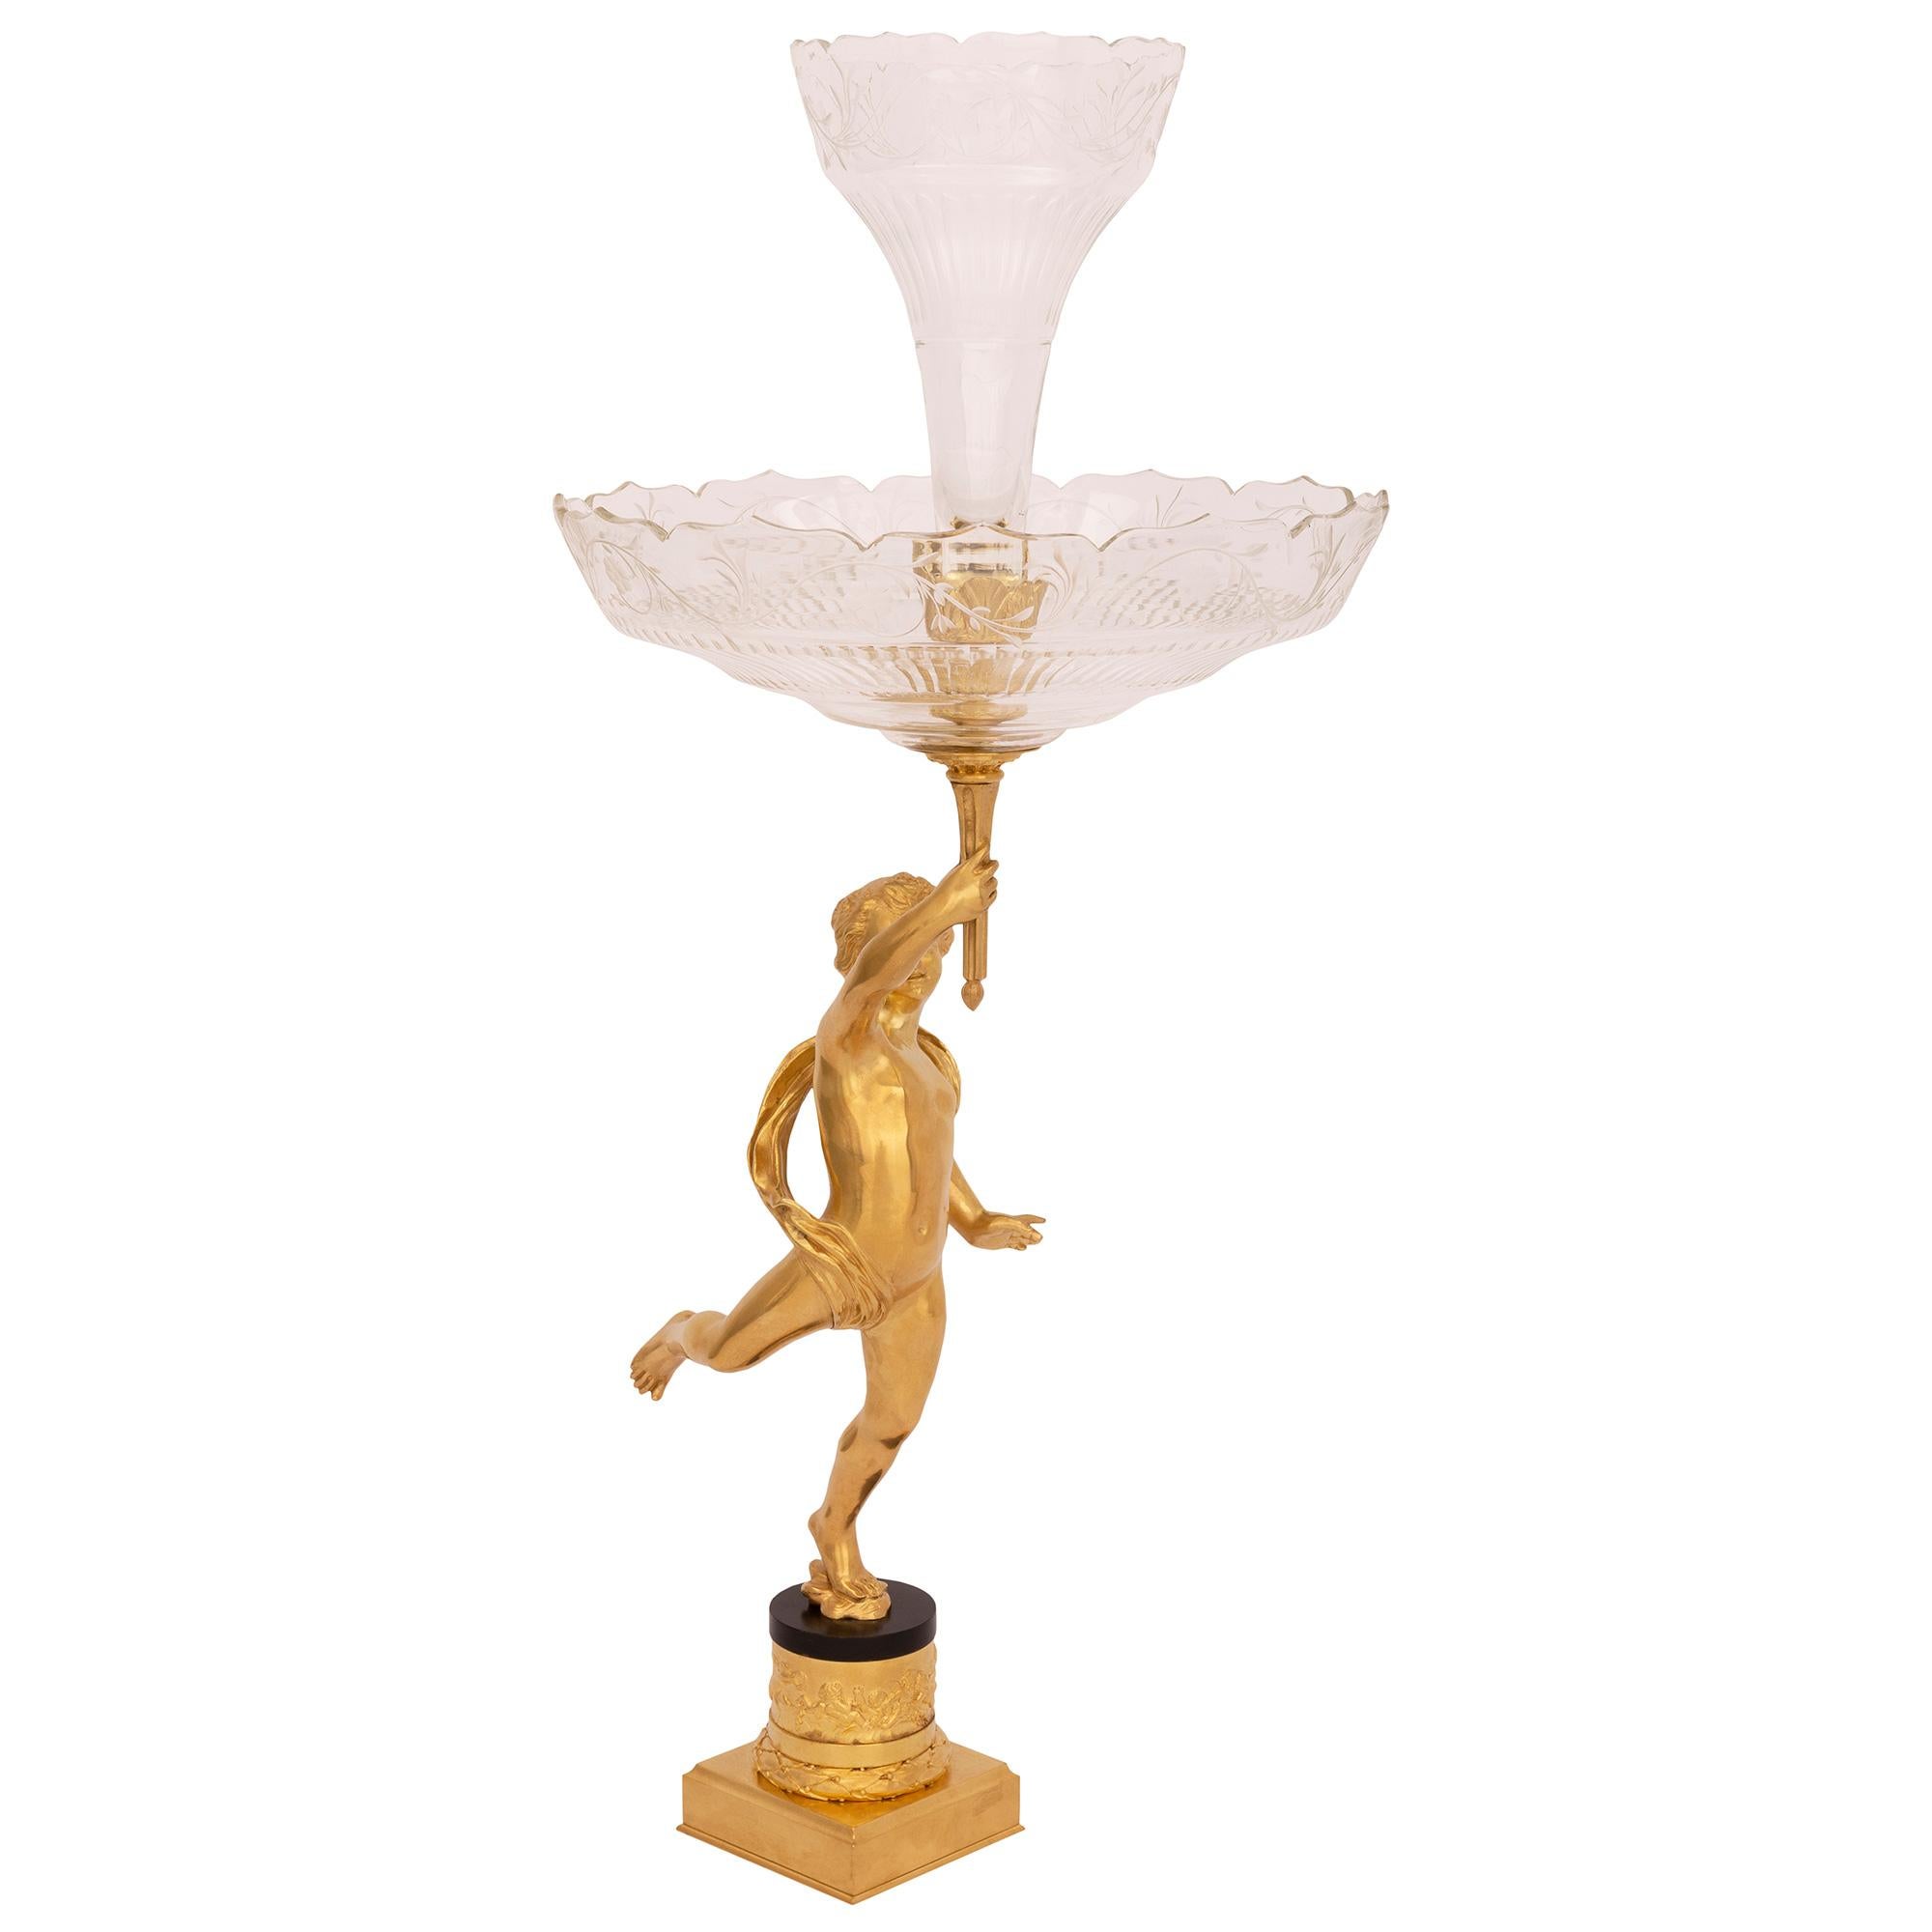 A most elegant French 19th century Louis XVI st. ormolu and crystal centerpiece. The centerpiece is raised by a fine square base with a richly chased wrap around berried laurel band and intricately detailed scenes of charming cherubs playing. At the